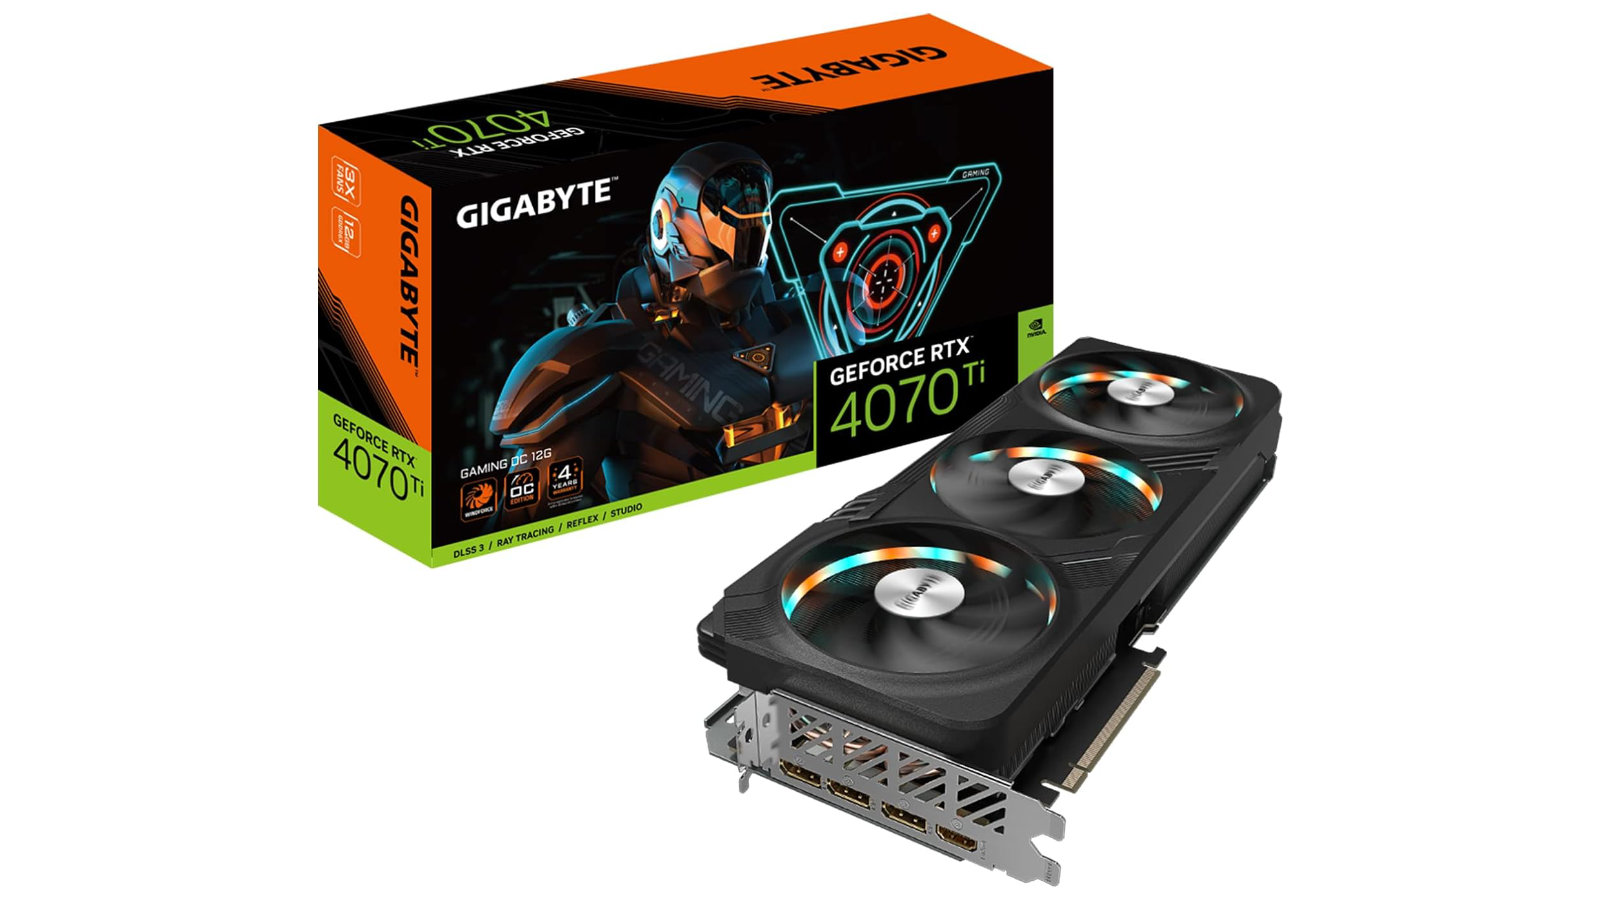 Gigabyte GeForce RTX 4070 Ti Gaming OC graphics card against a white background.